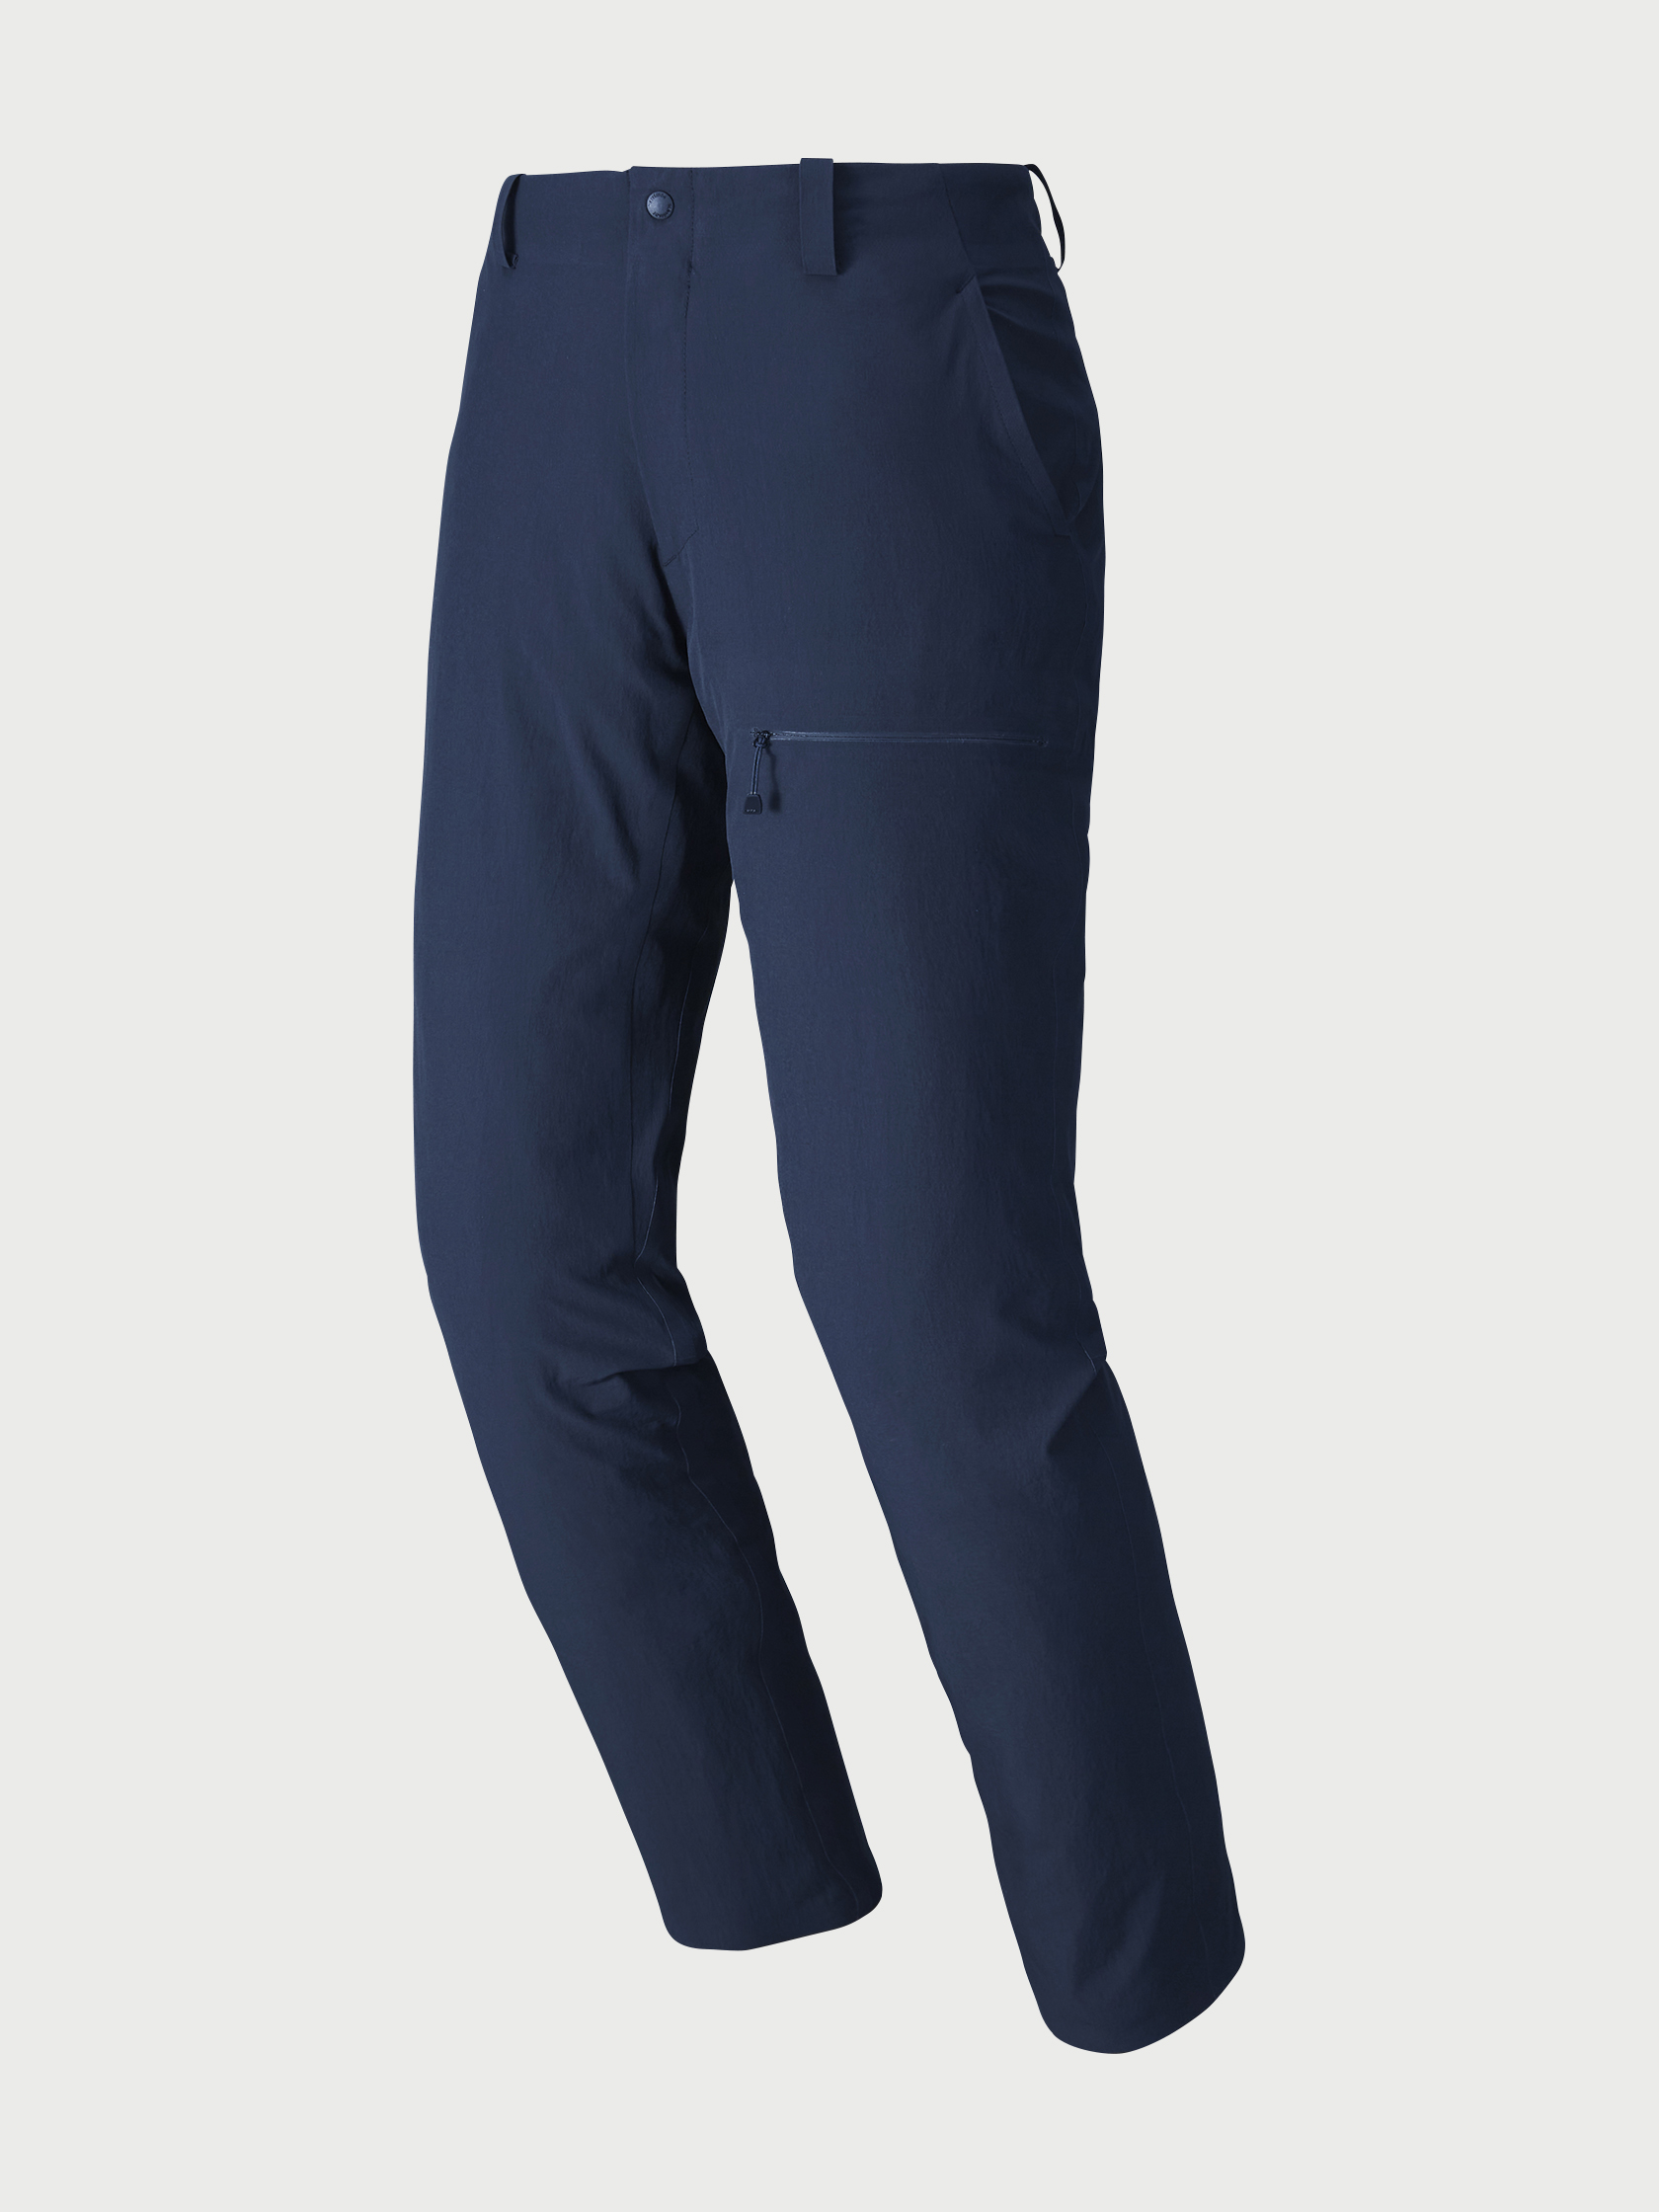 technical stretch pants W's | karrimor カリマー | リュックサック 